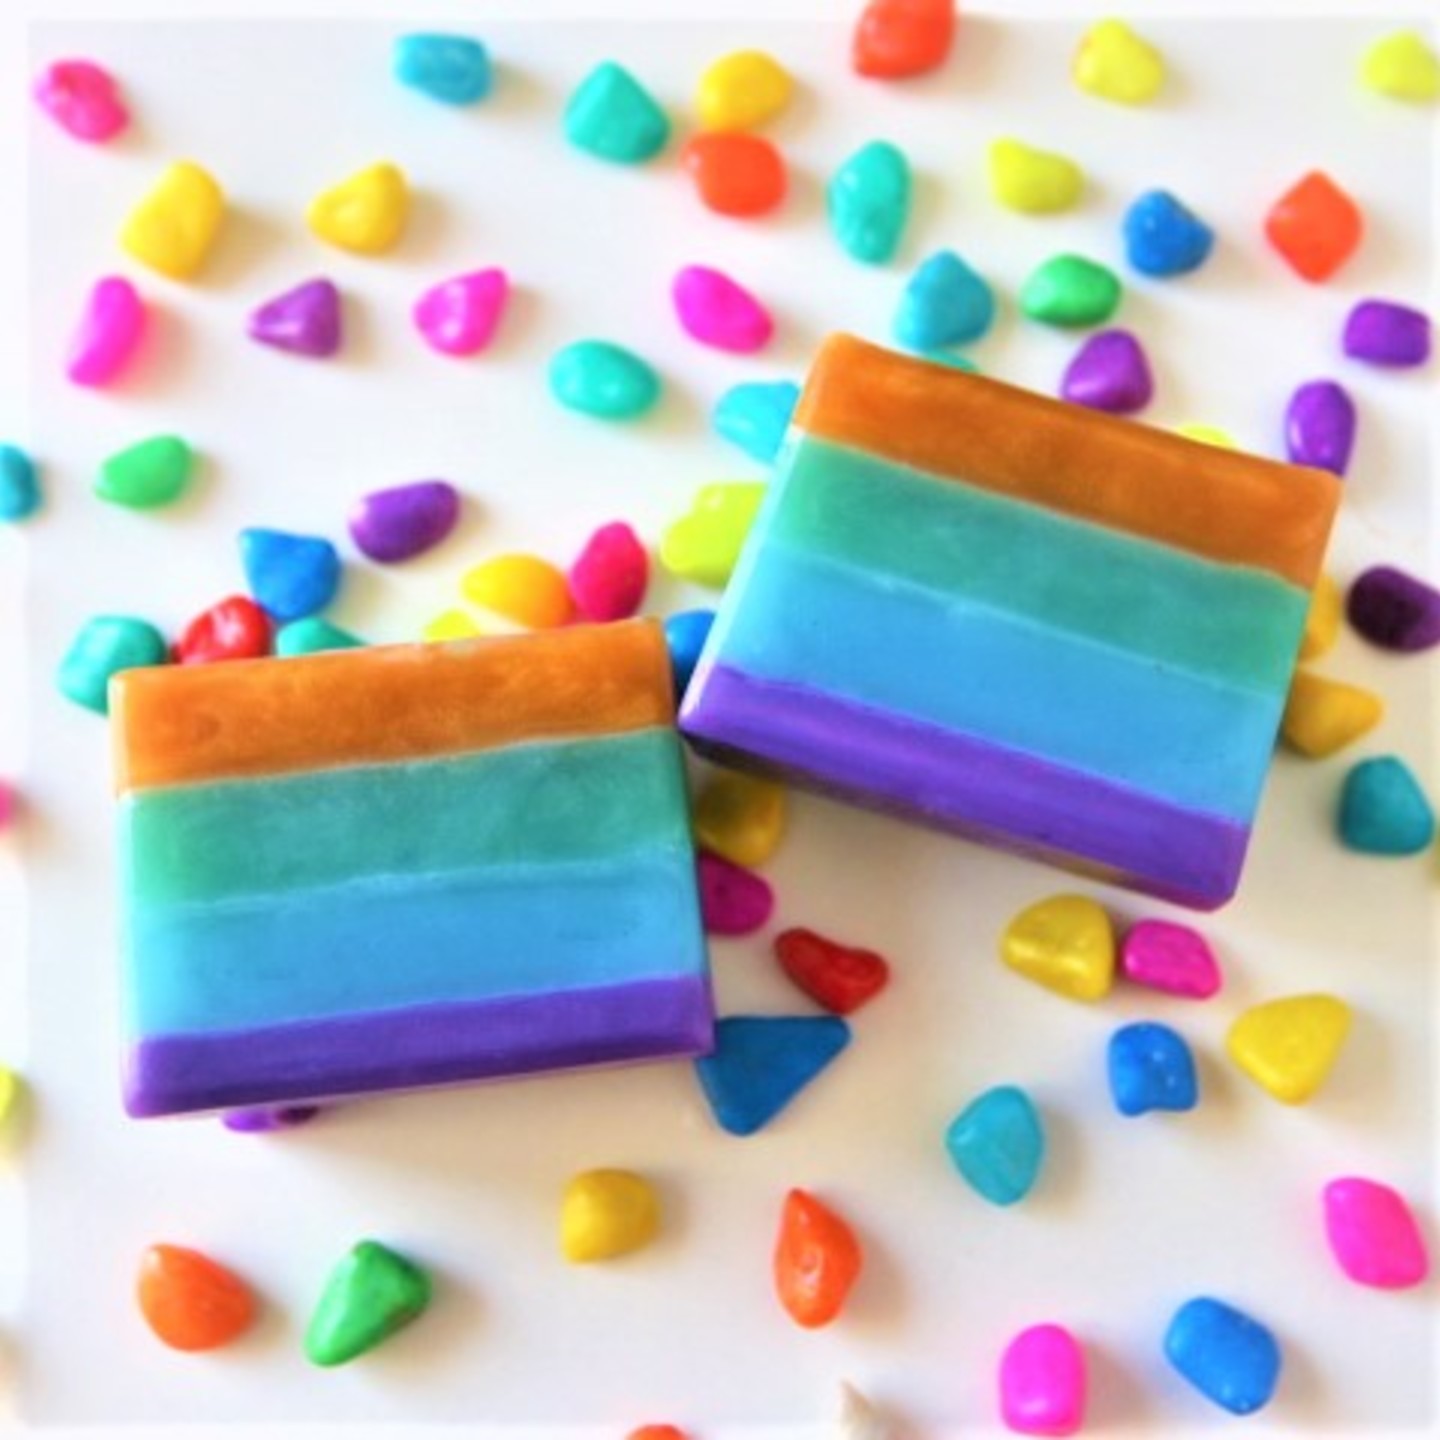 MRIJA Confetti Layered Rainbow Soaps - Set of 2 (100 gms each) in a Floral Gift Box